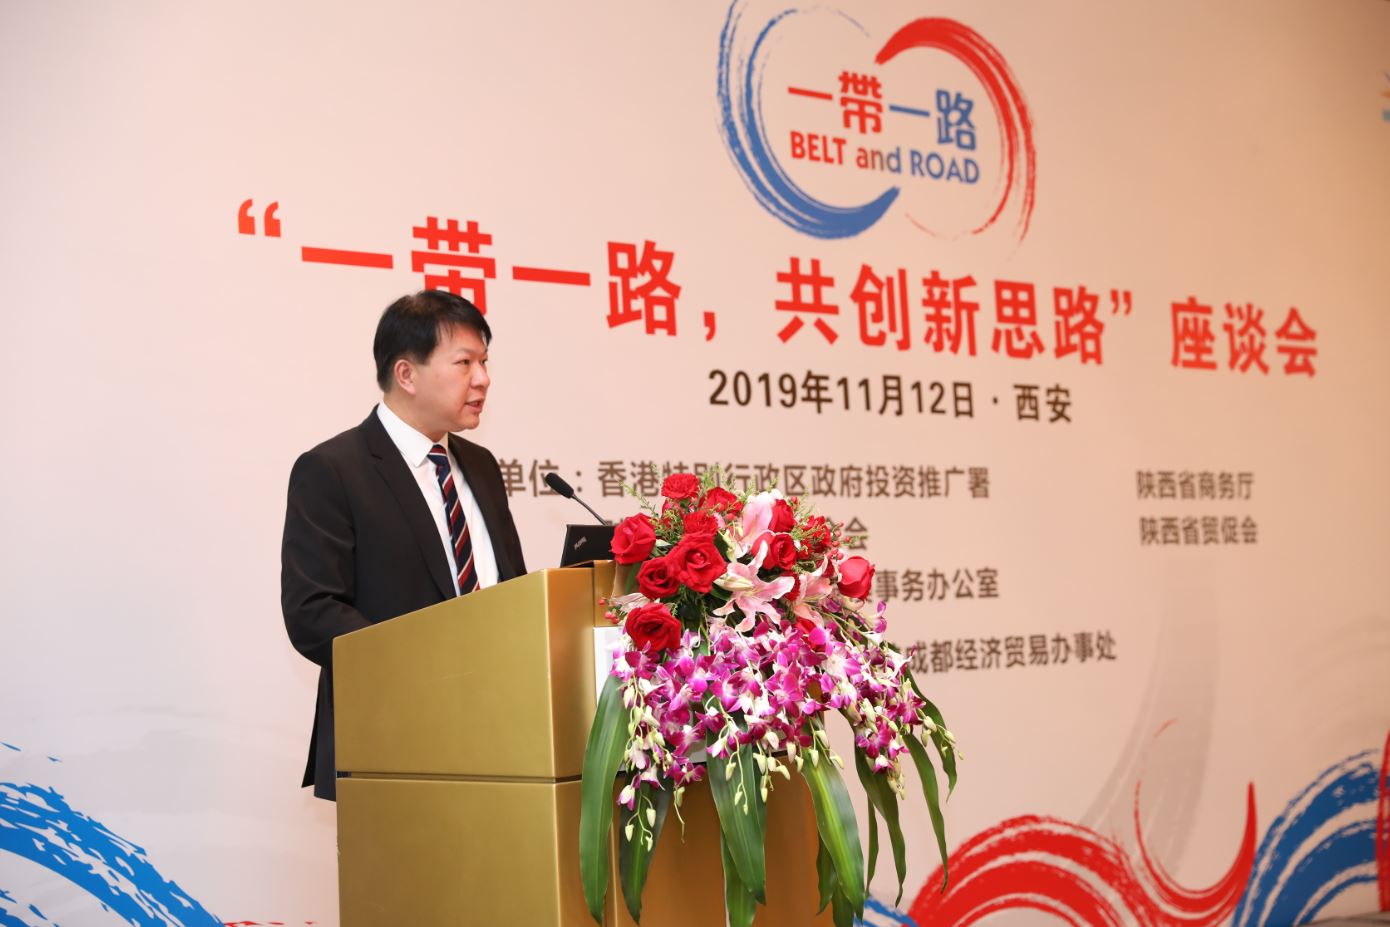 Associate Director-General of Investment Promotion, Mr Vincent Tang, speaks at the investment promotion roundtable in Xi’an, Shaanxi Province.